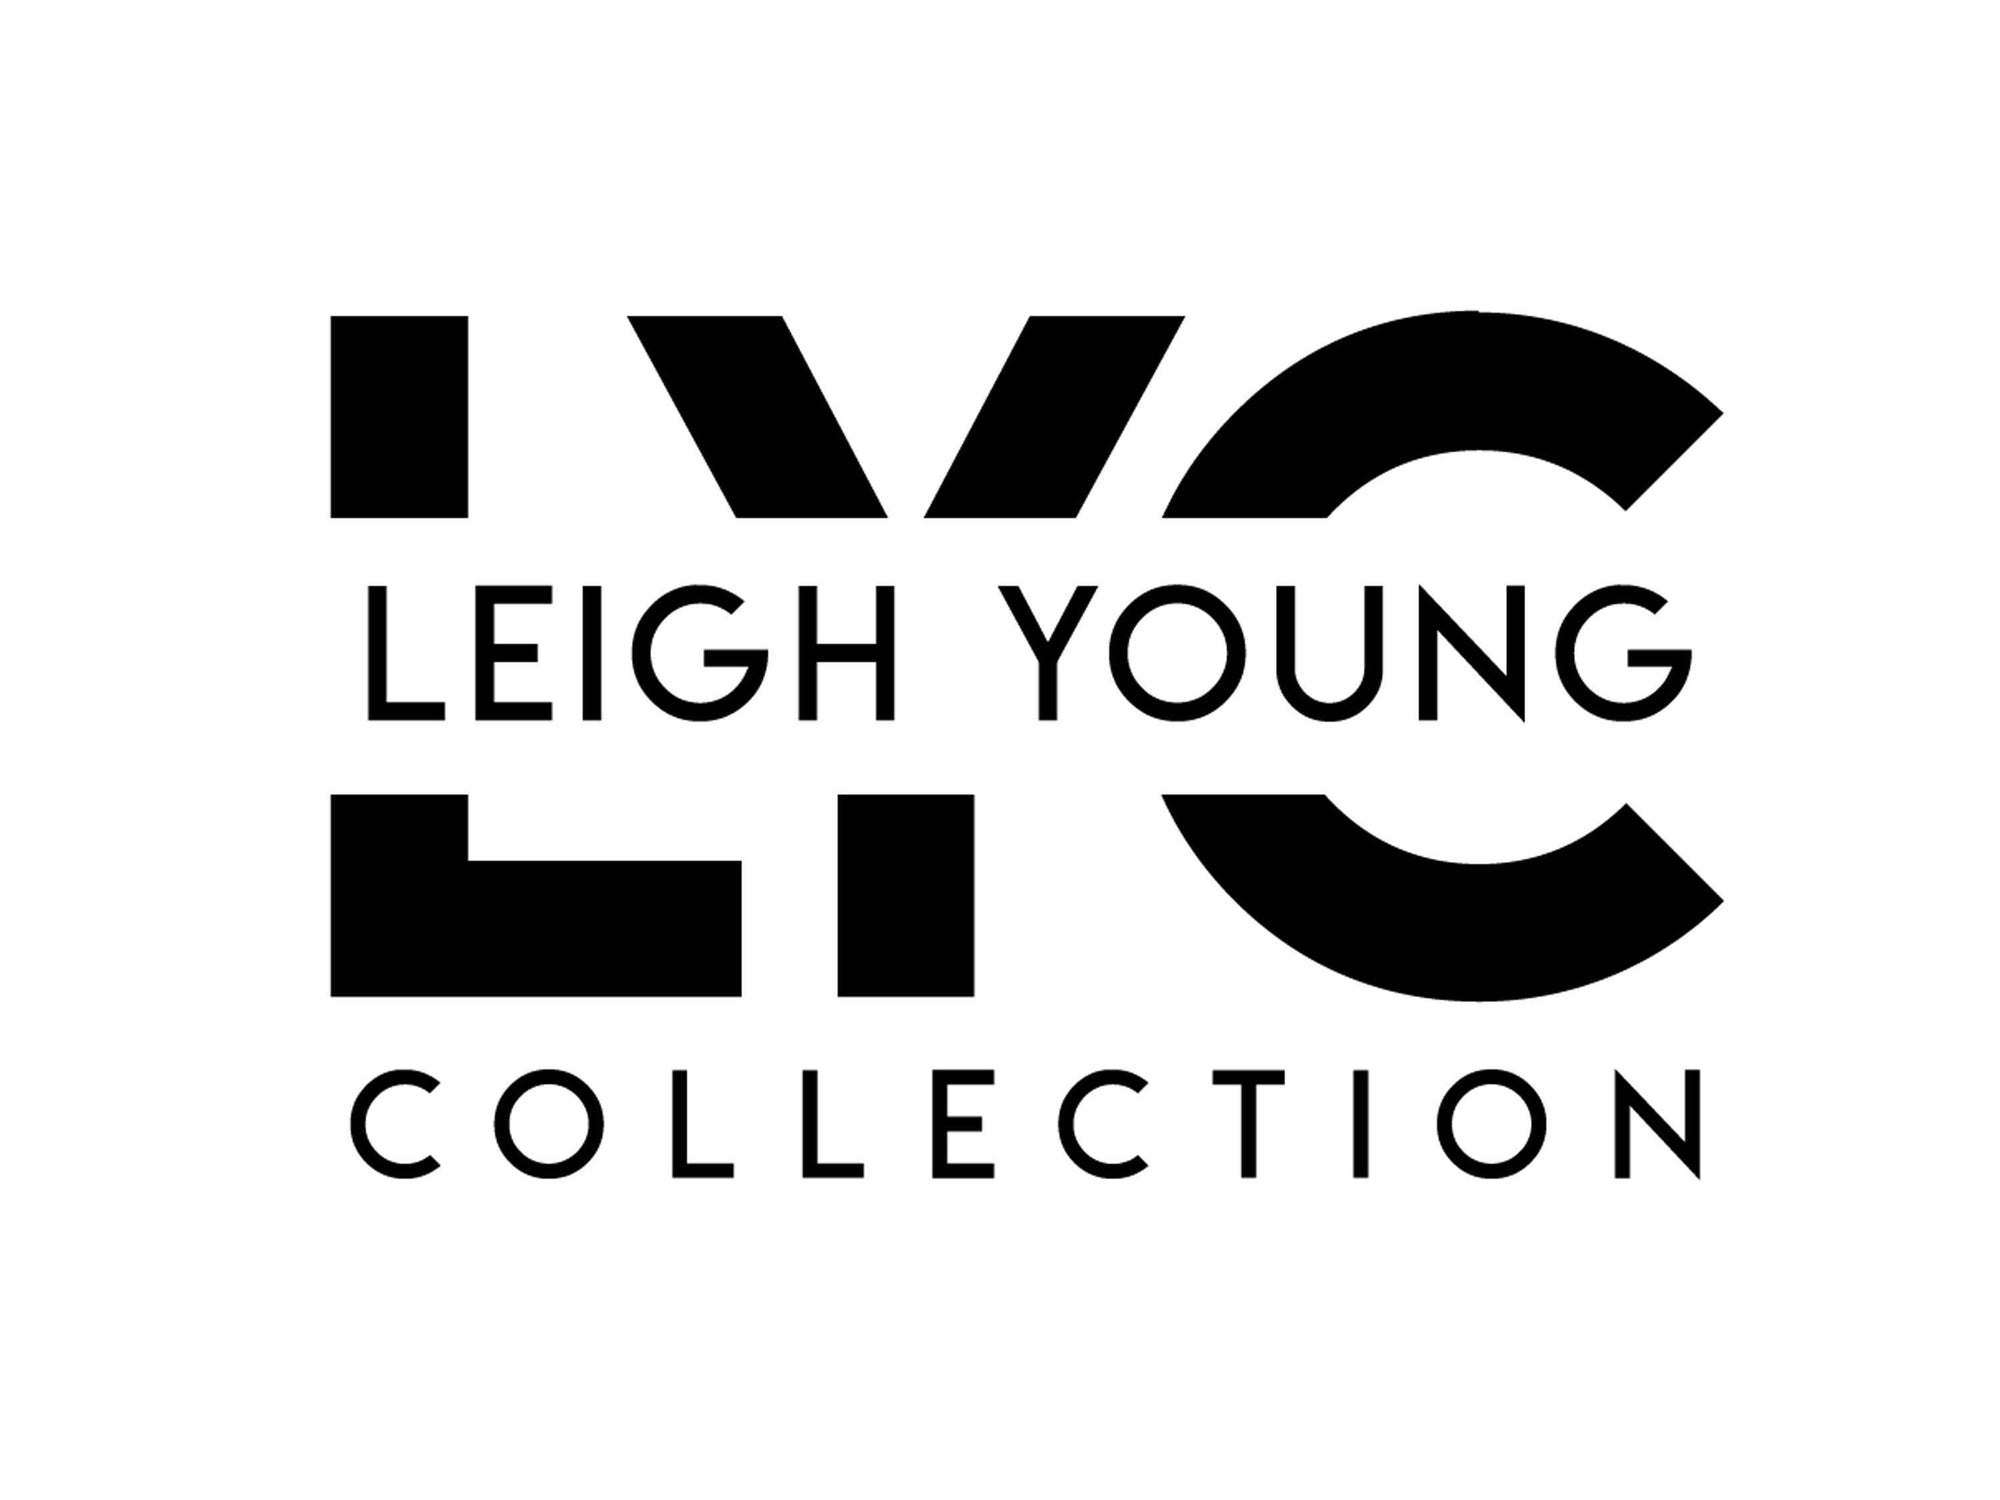 Leigh Young Collection logo - resort and Leasure wear clothing line handsewn in Seattle WA USA